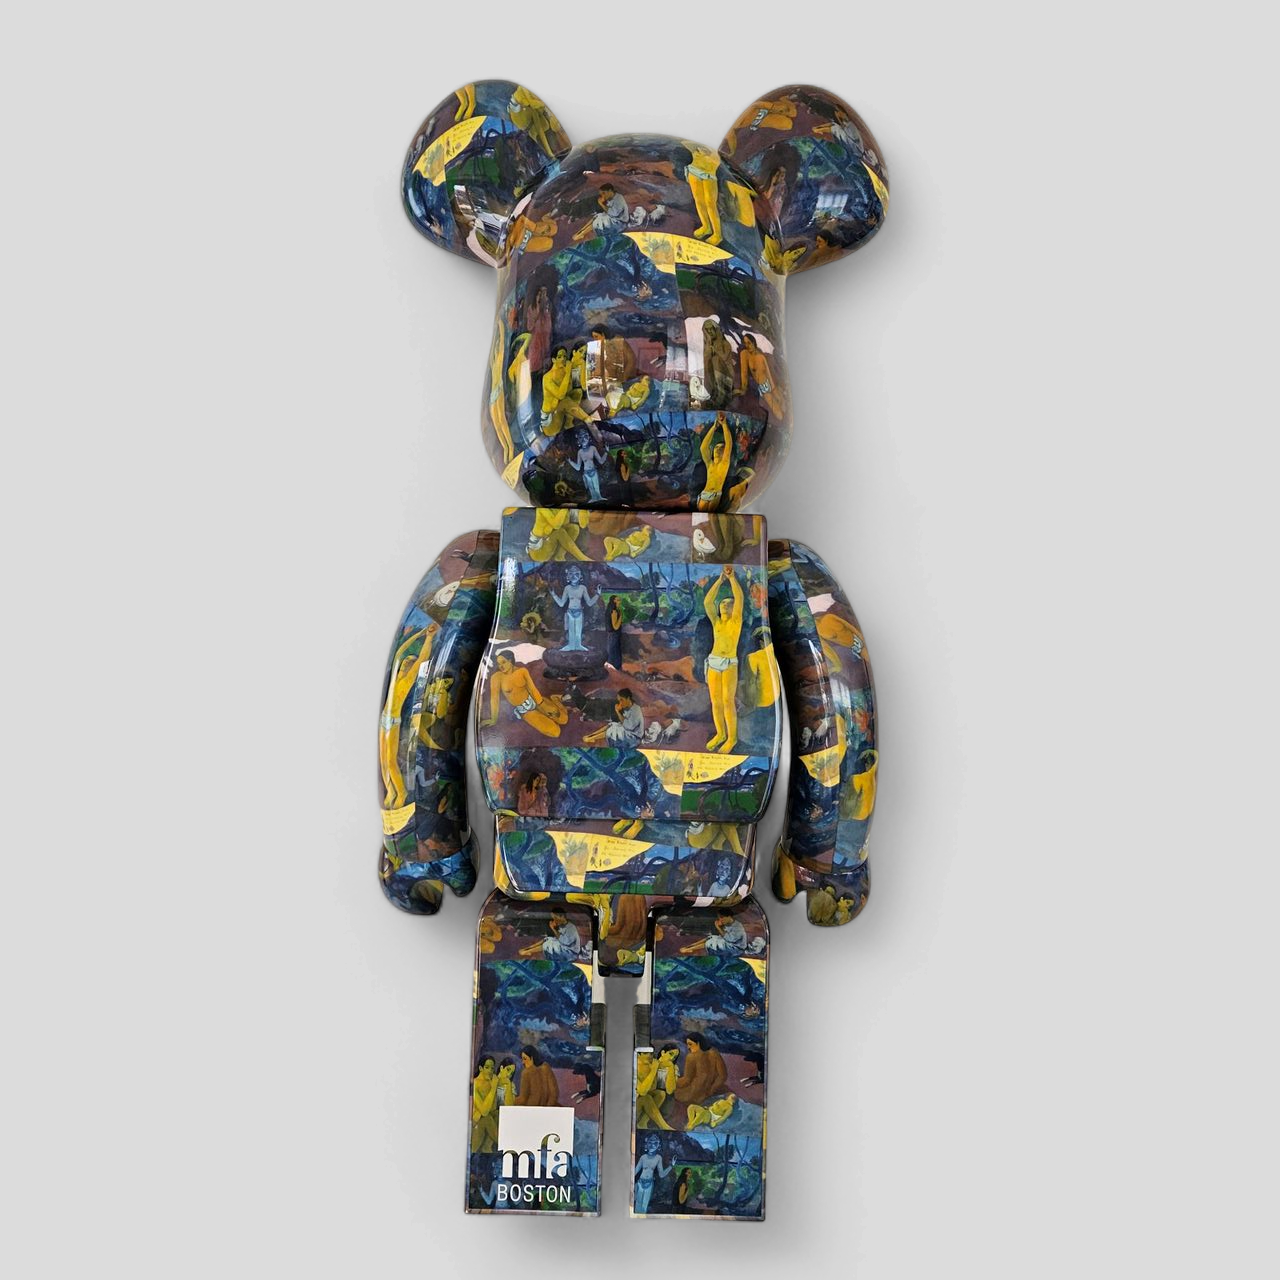 BE@RBRICK Eugène Henri Paul Gauguin "Where Do We Come From? What Are We? Where Are We Going?" (1000%)